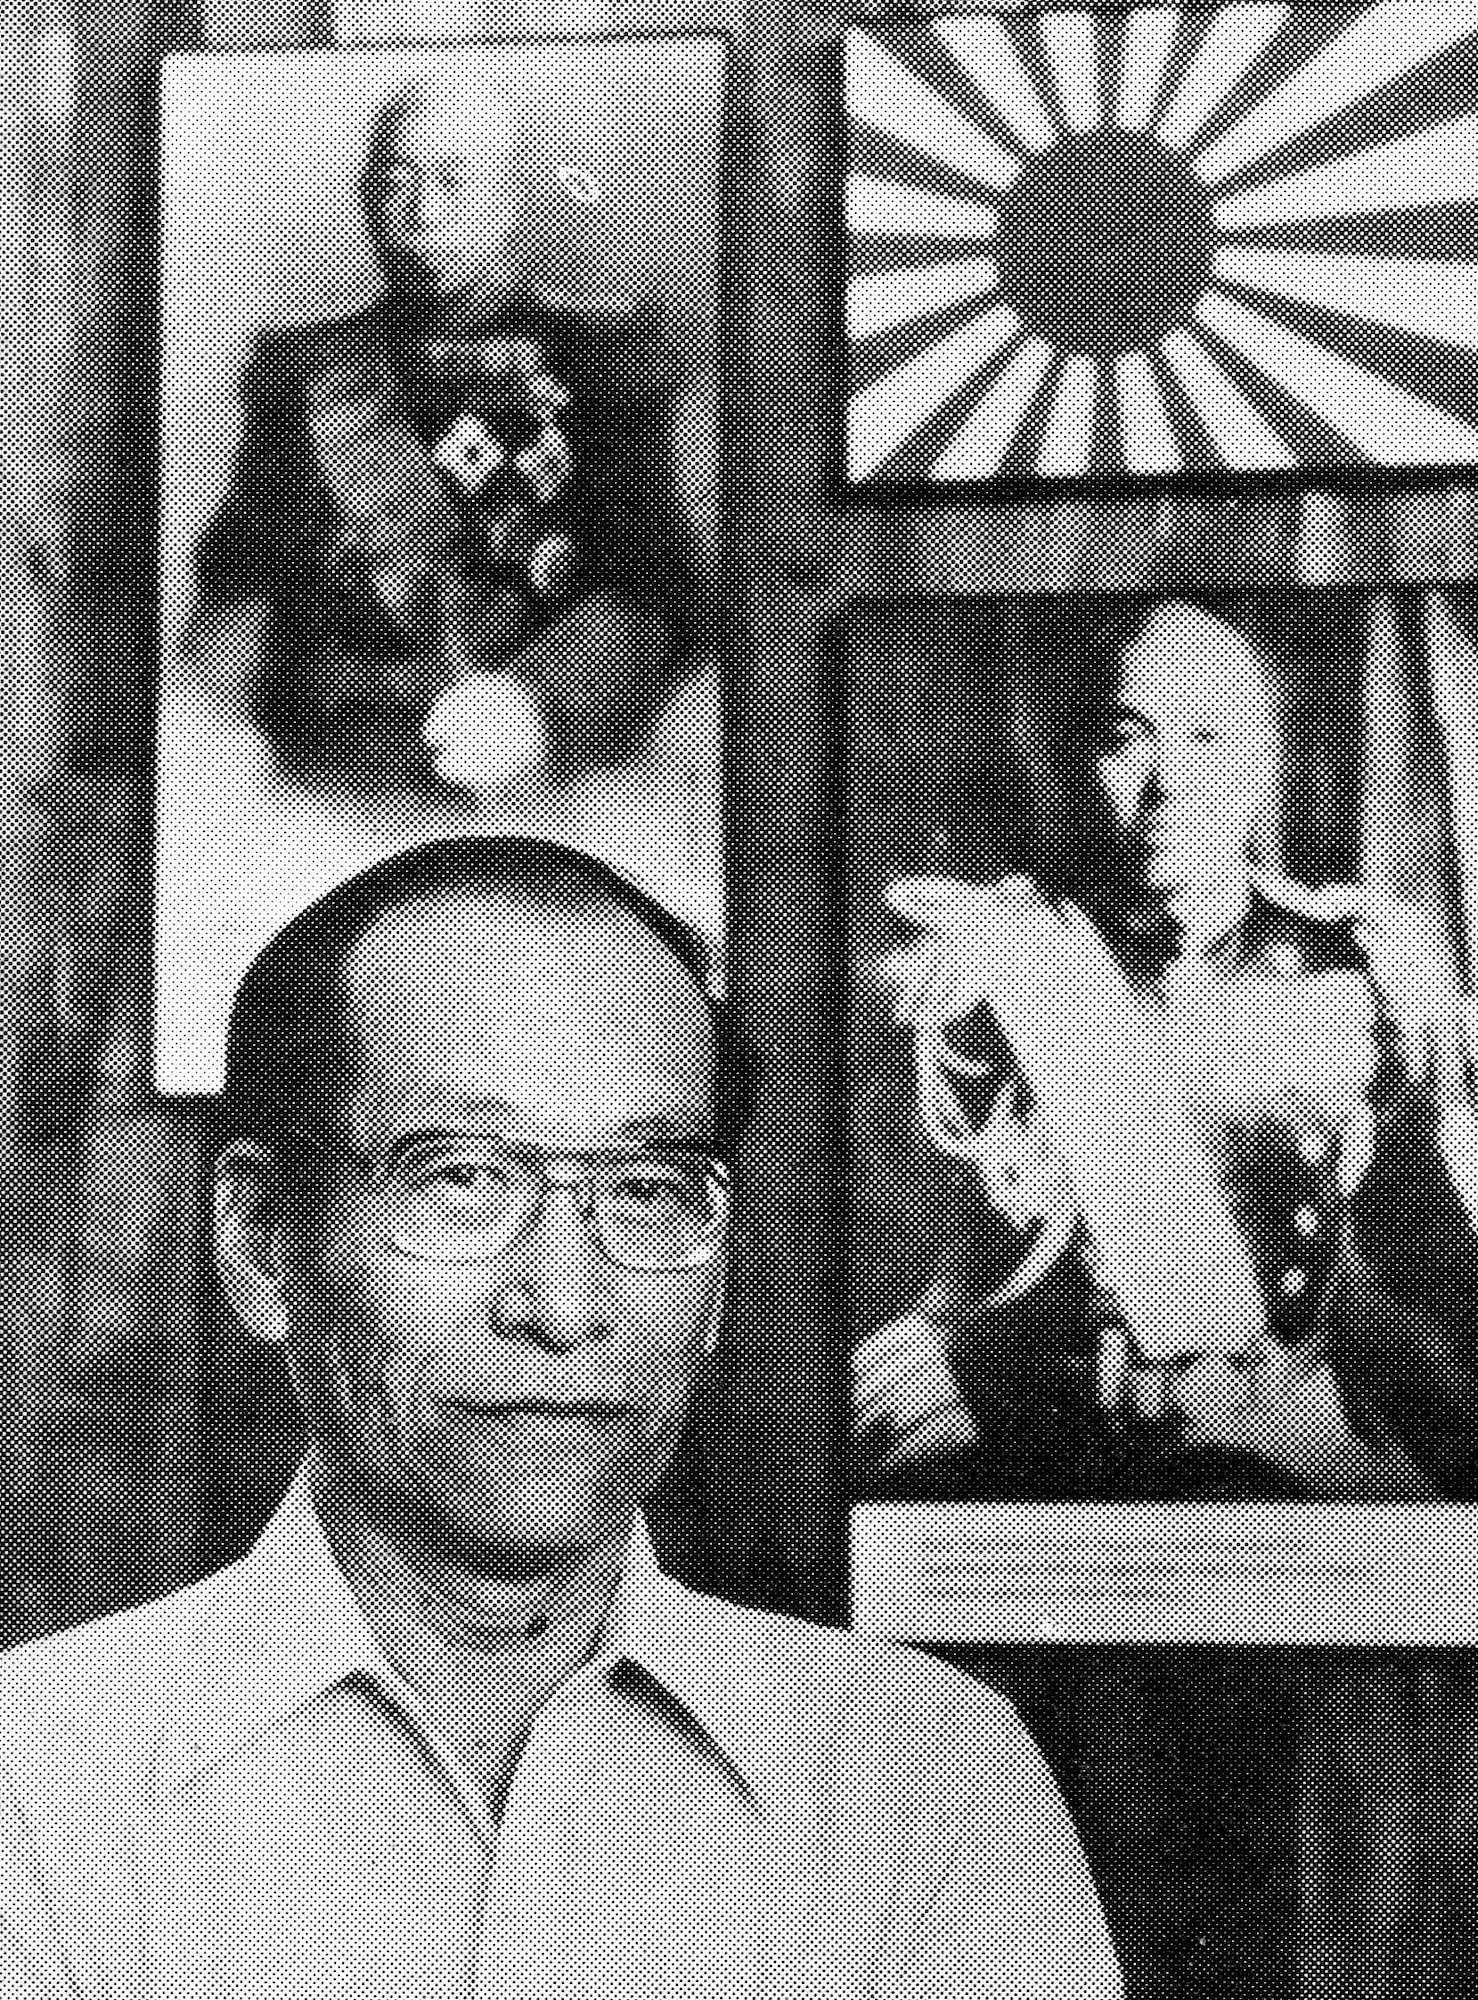 Joe Muratsuchi, an American inducted into the Japanese army, stands beneath a display of the Japanese naval flag and World War II leaders, Admiral Yamamoto (left) and Admiral Nagumo, at the Arizona War Memorial Musuem in Hawaii in 1987. (U.S. Air Force photo/Tech. Sgt. Bill Thompson)